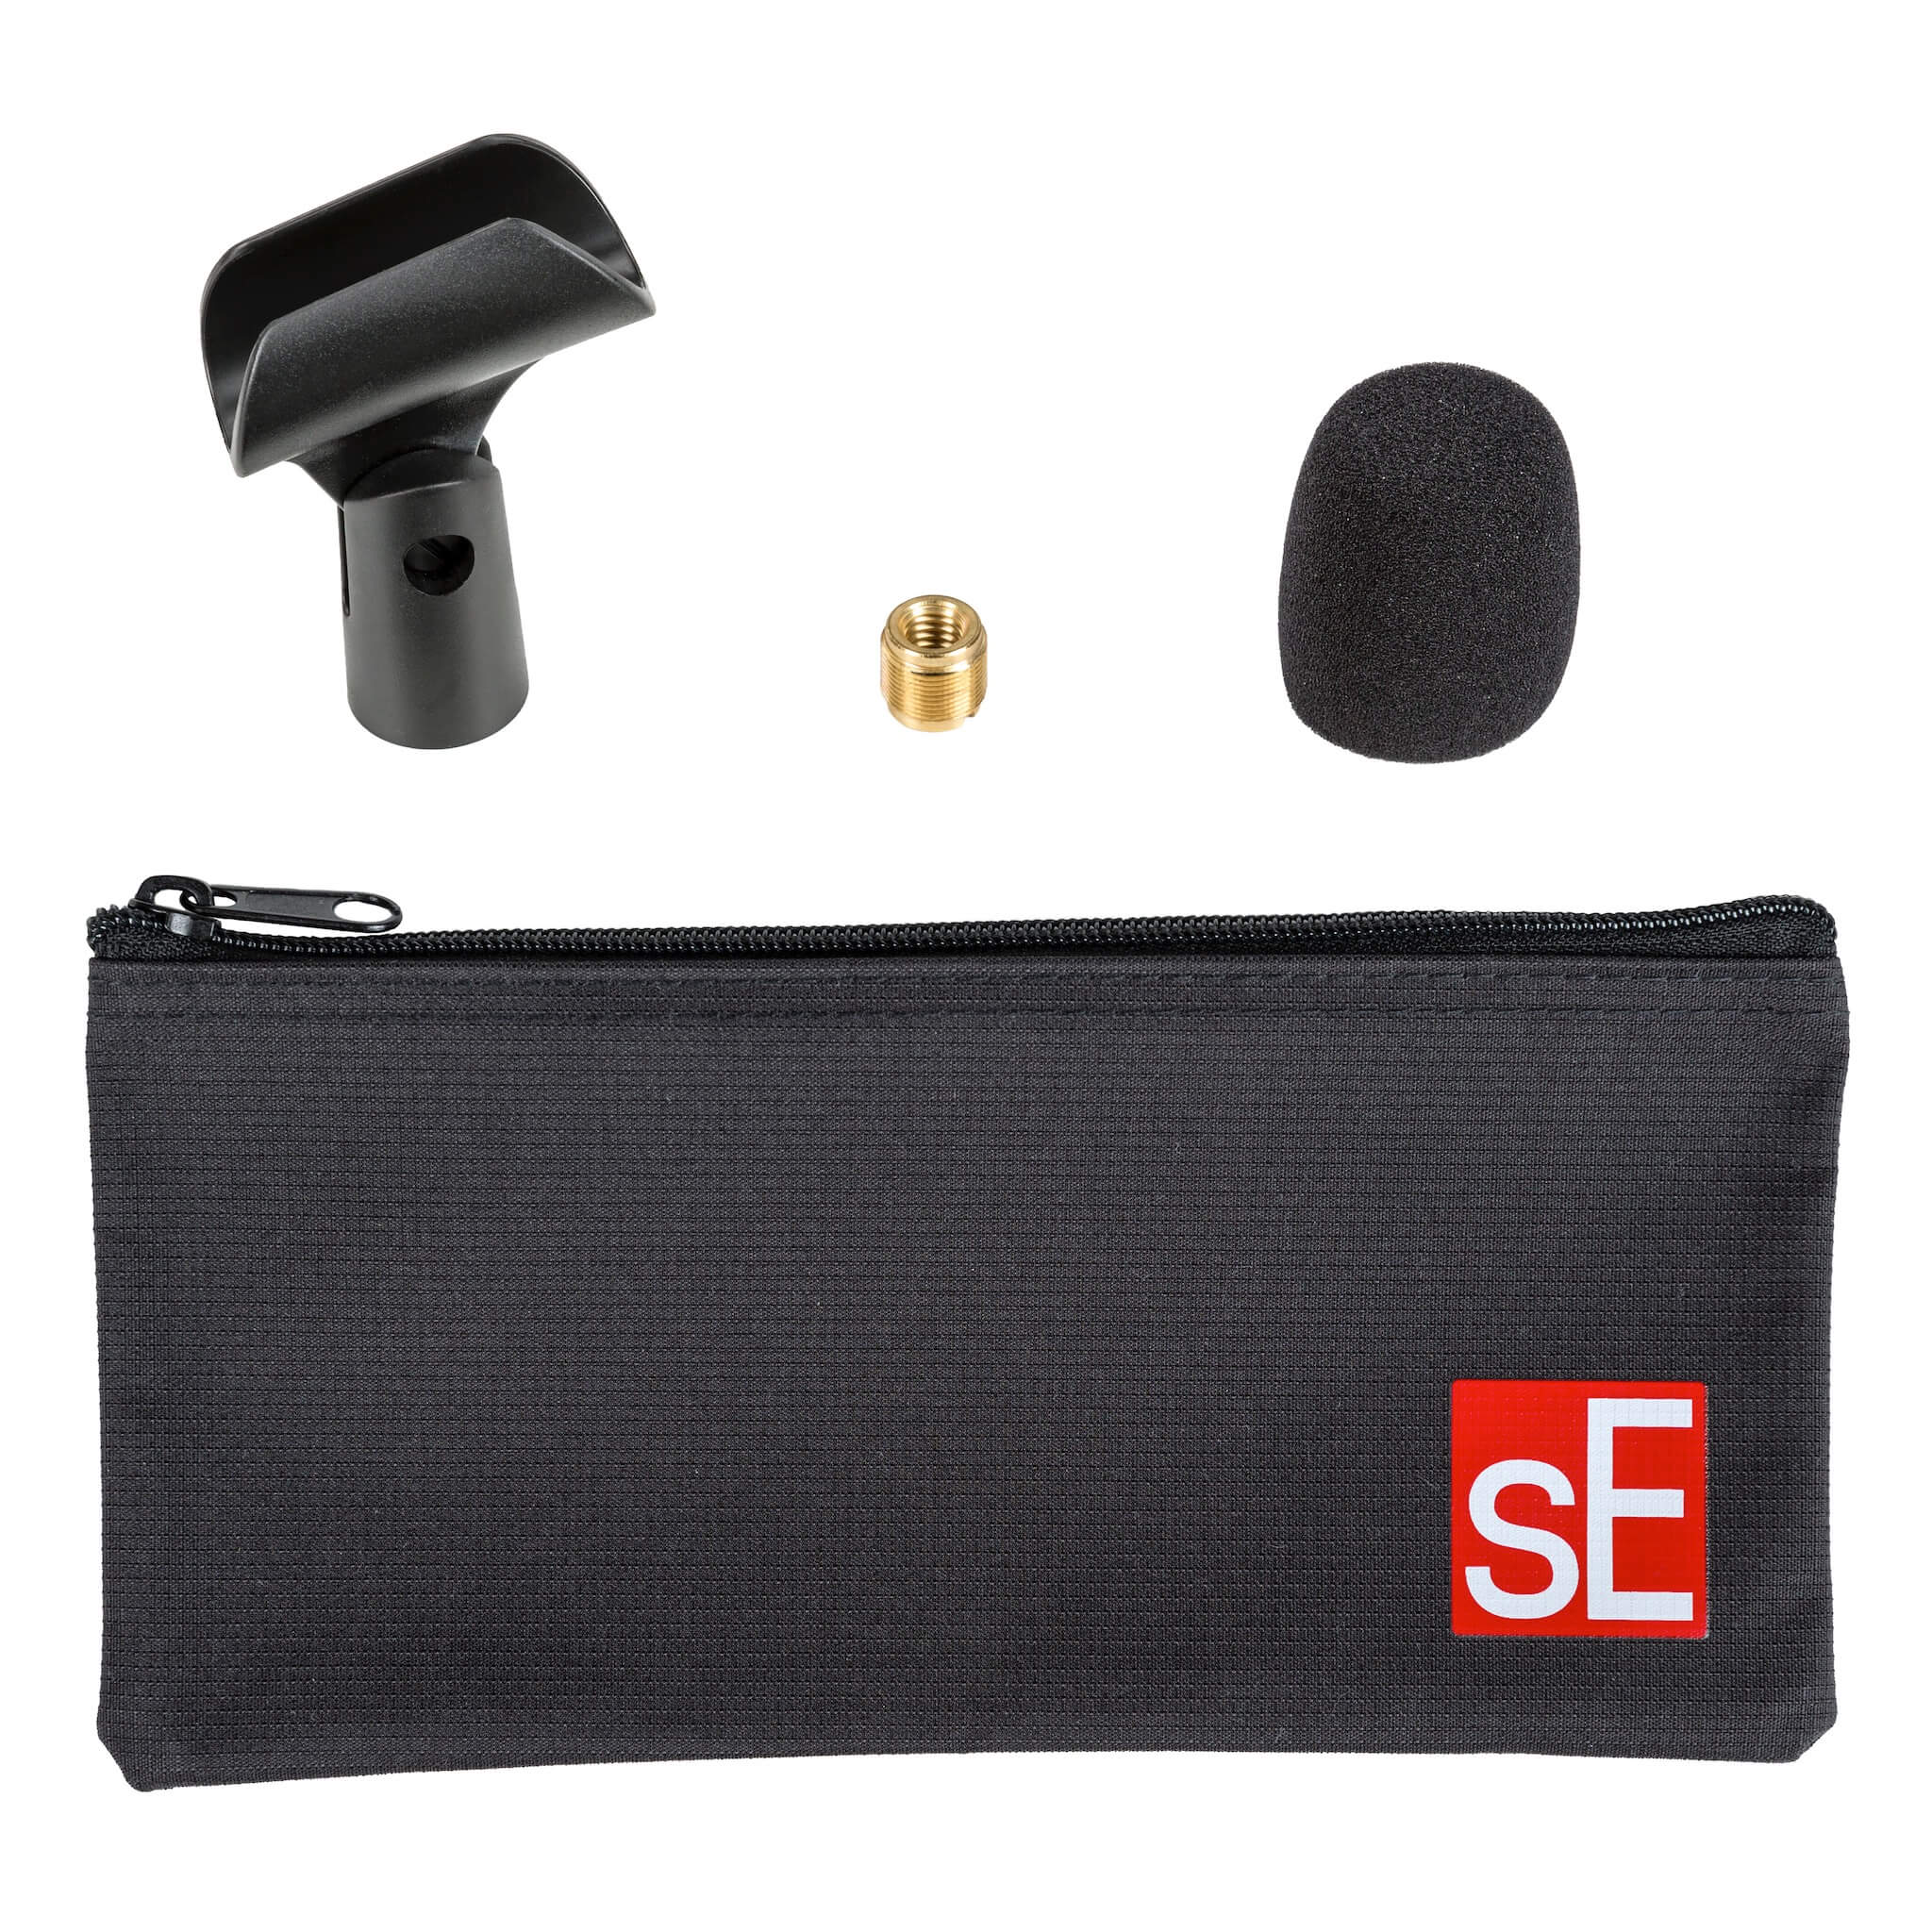 sE Electronics V7 SWITCH - Supercardioid Dynamic Vocal Microphone, included accessories